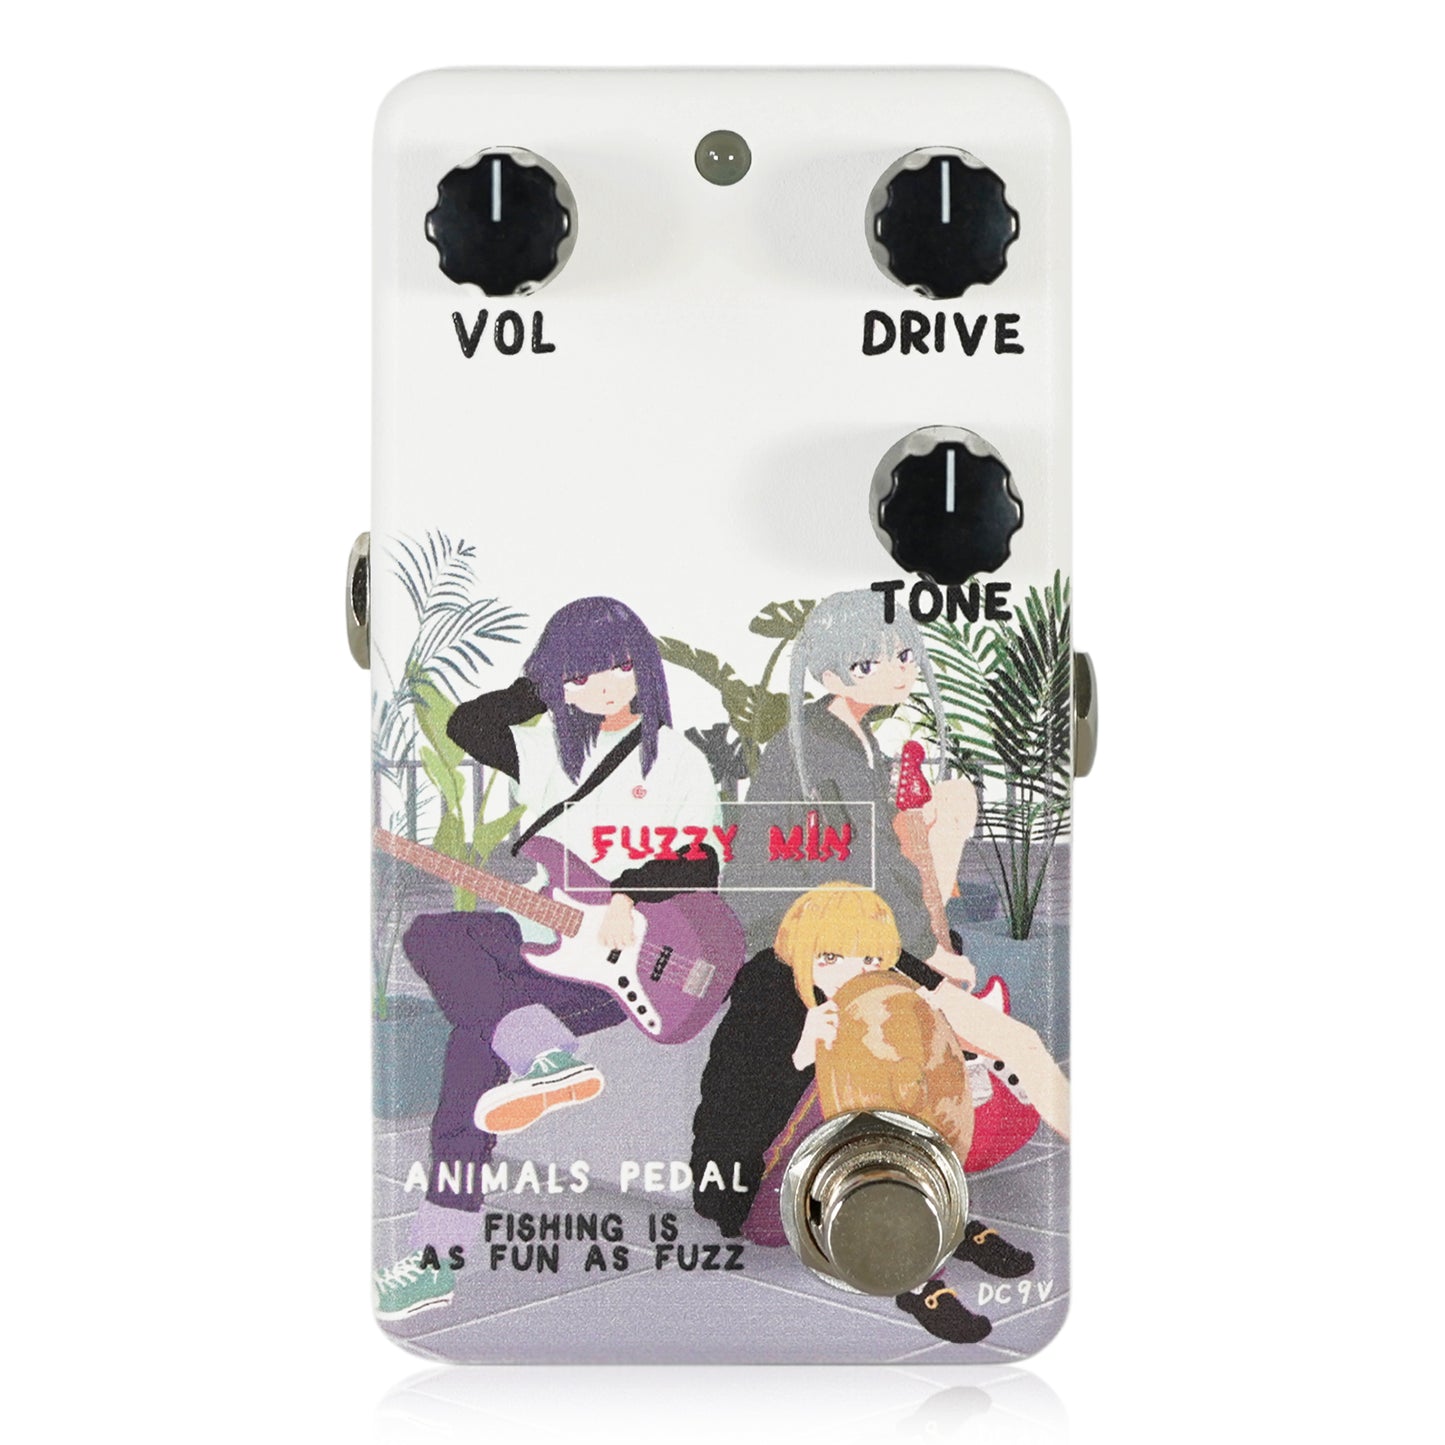 Animals Pedal Custom Illustrated 049 FISHING IS AS FUN AS FUZZ by ぶん "FUZZY MIN"